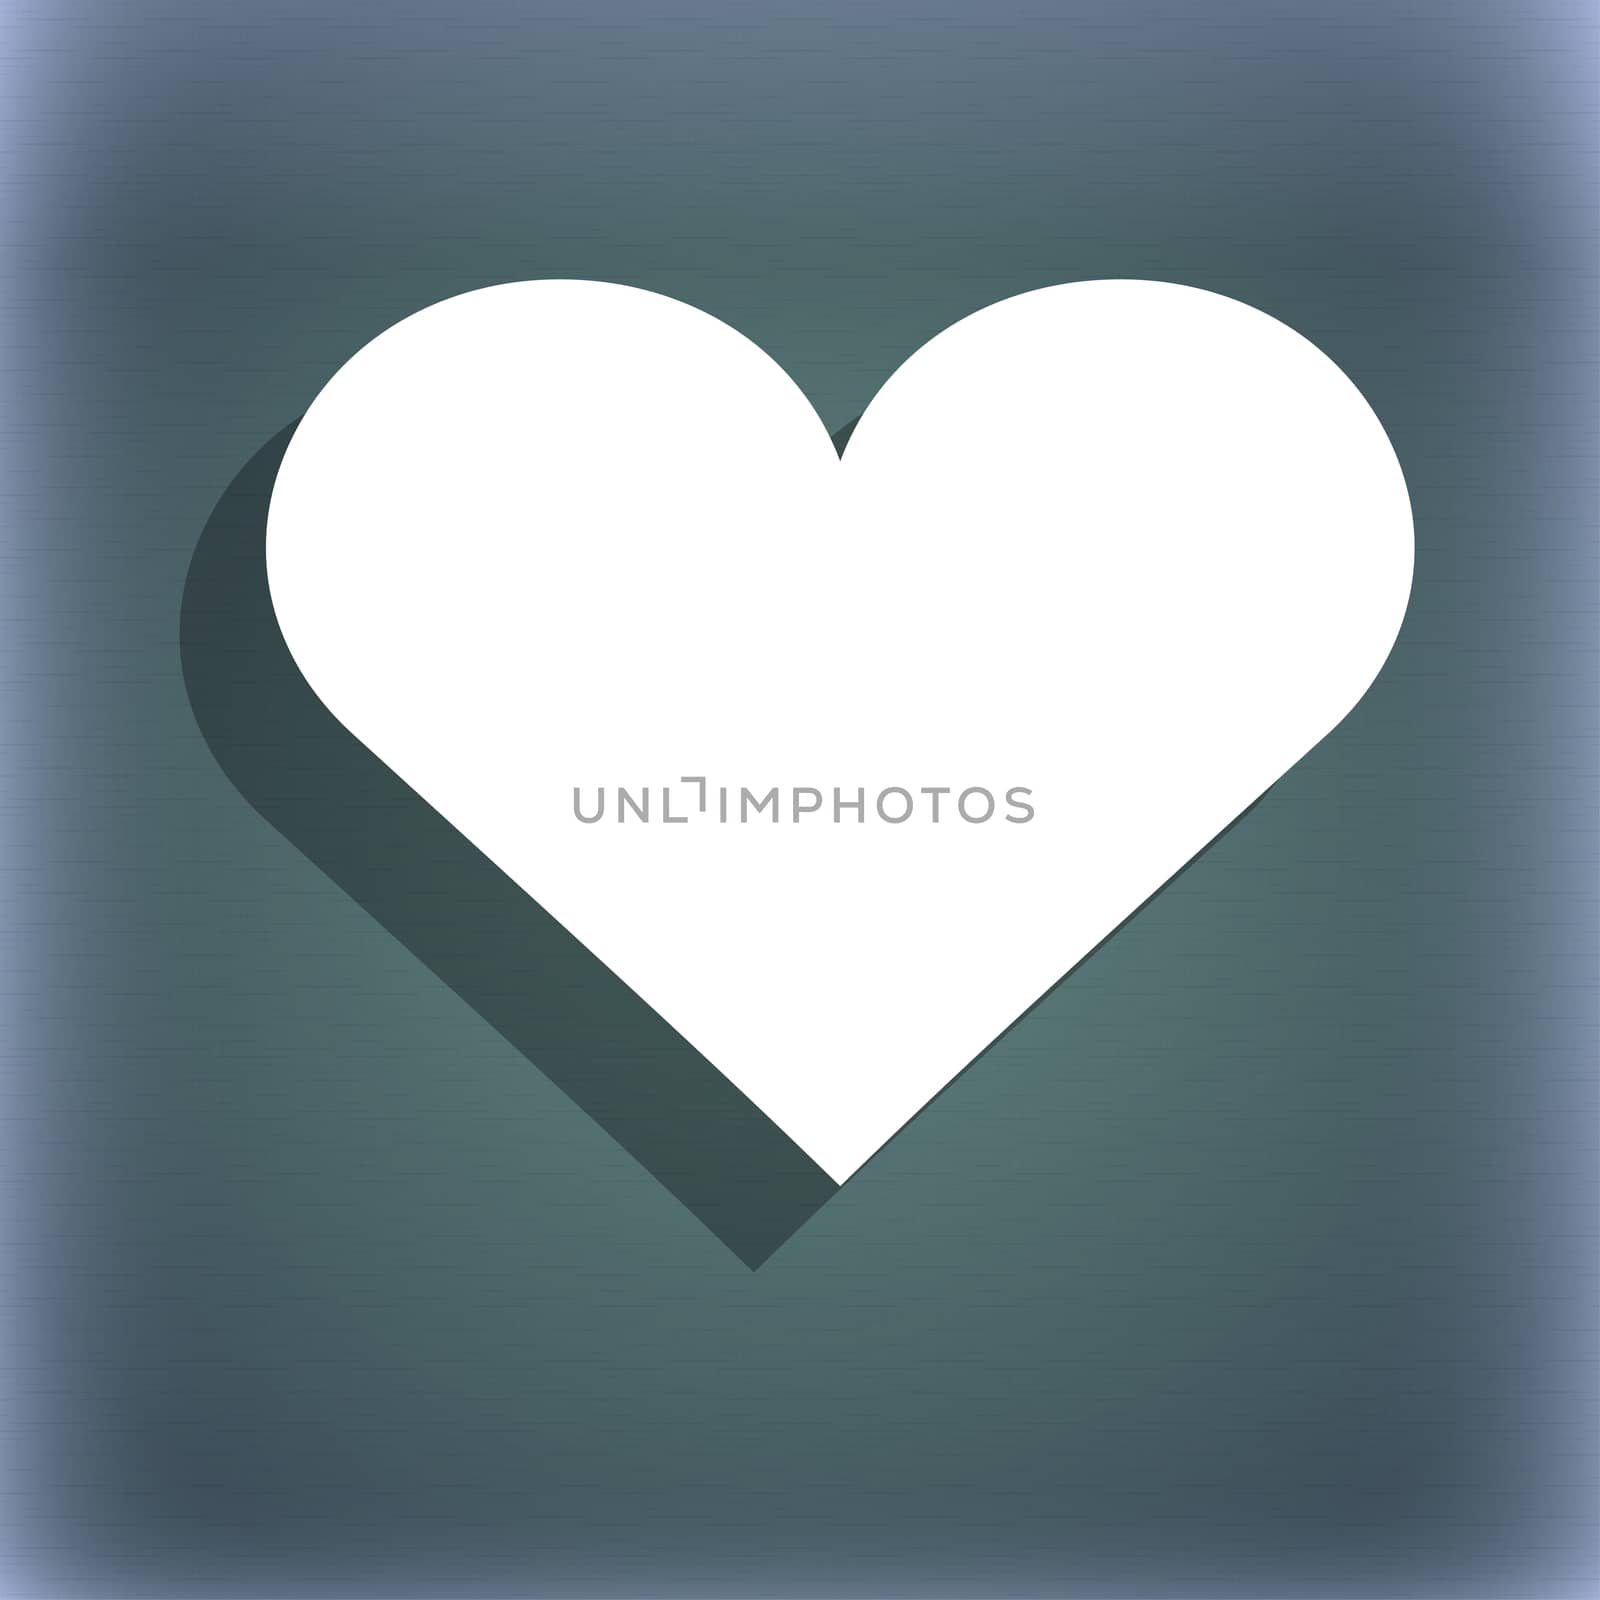 Heart, Love icon symbol on the blue-green abstract background with shadow and space for your text. illustration